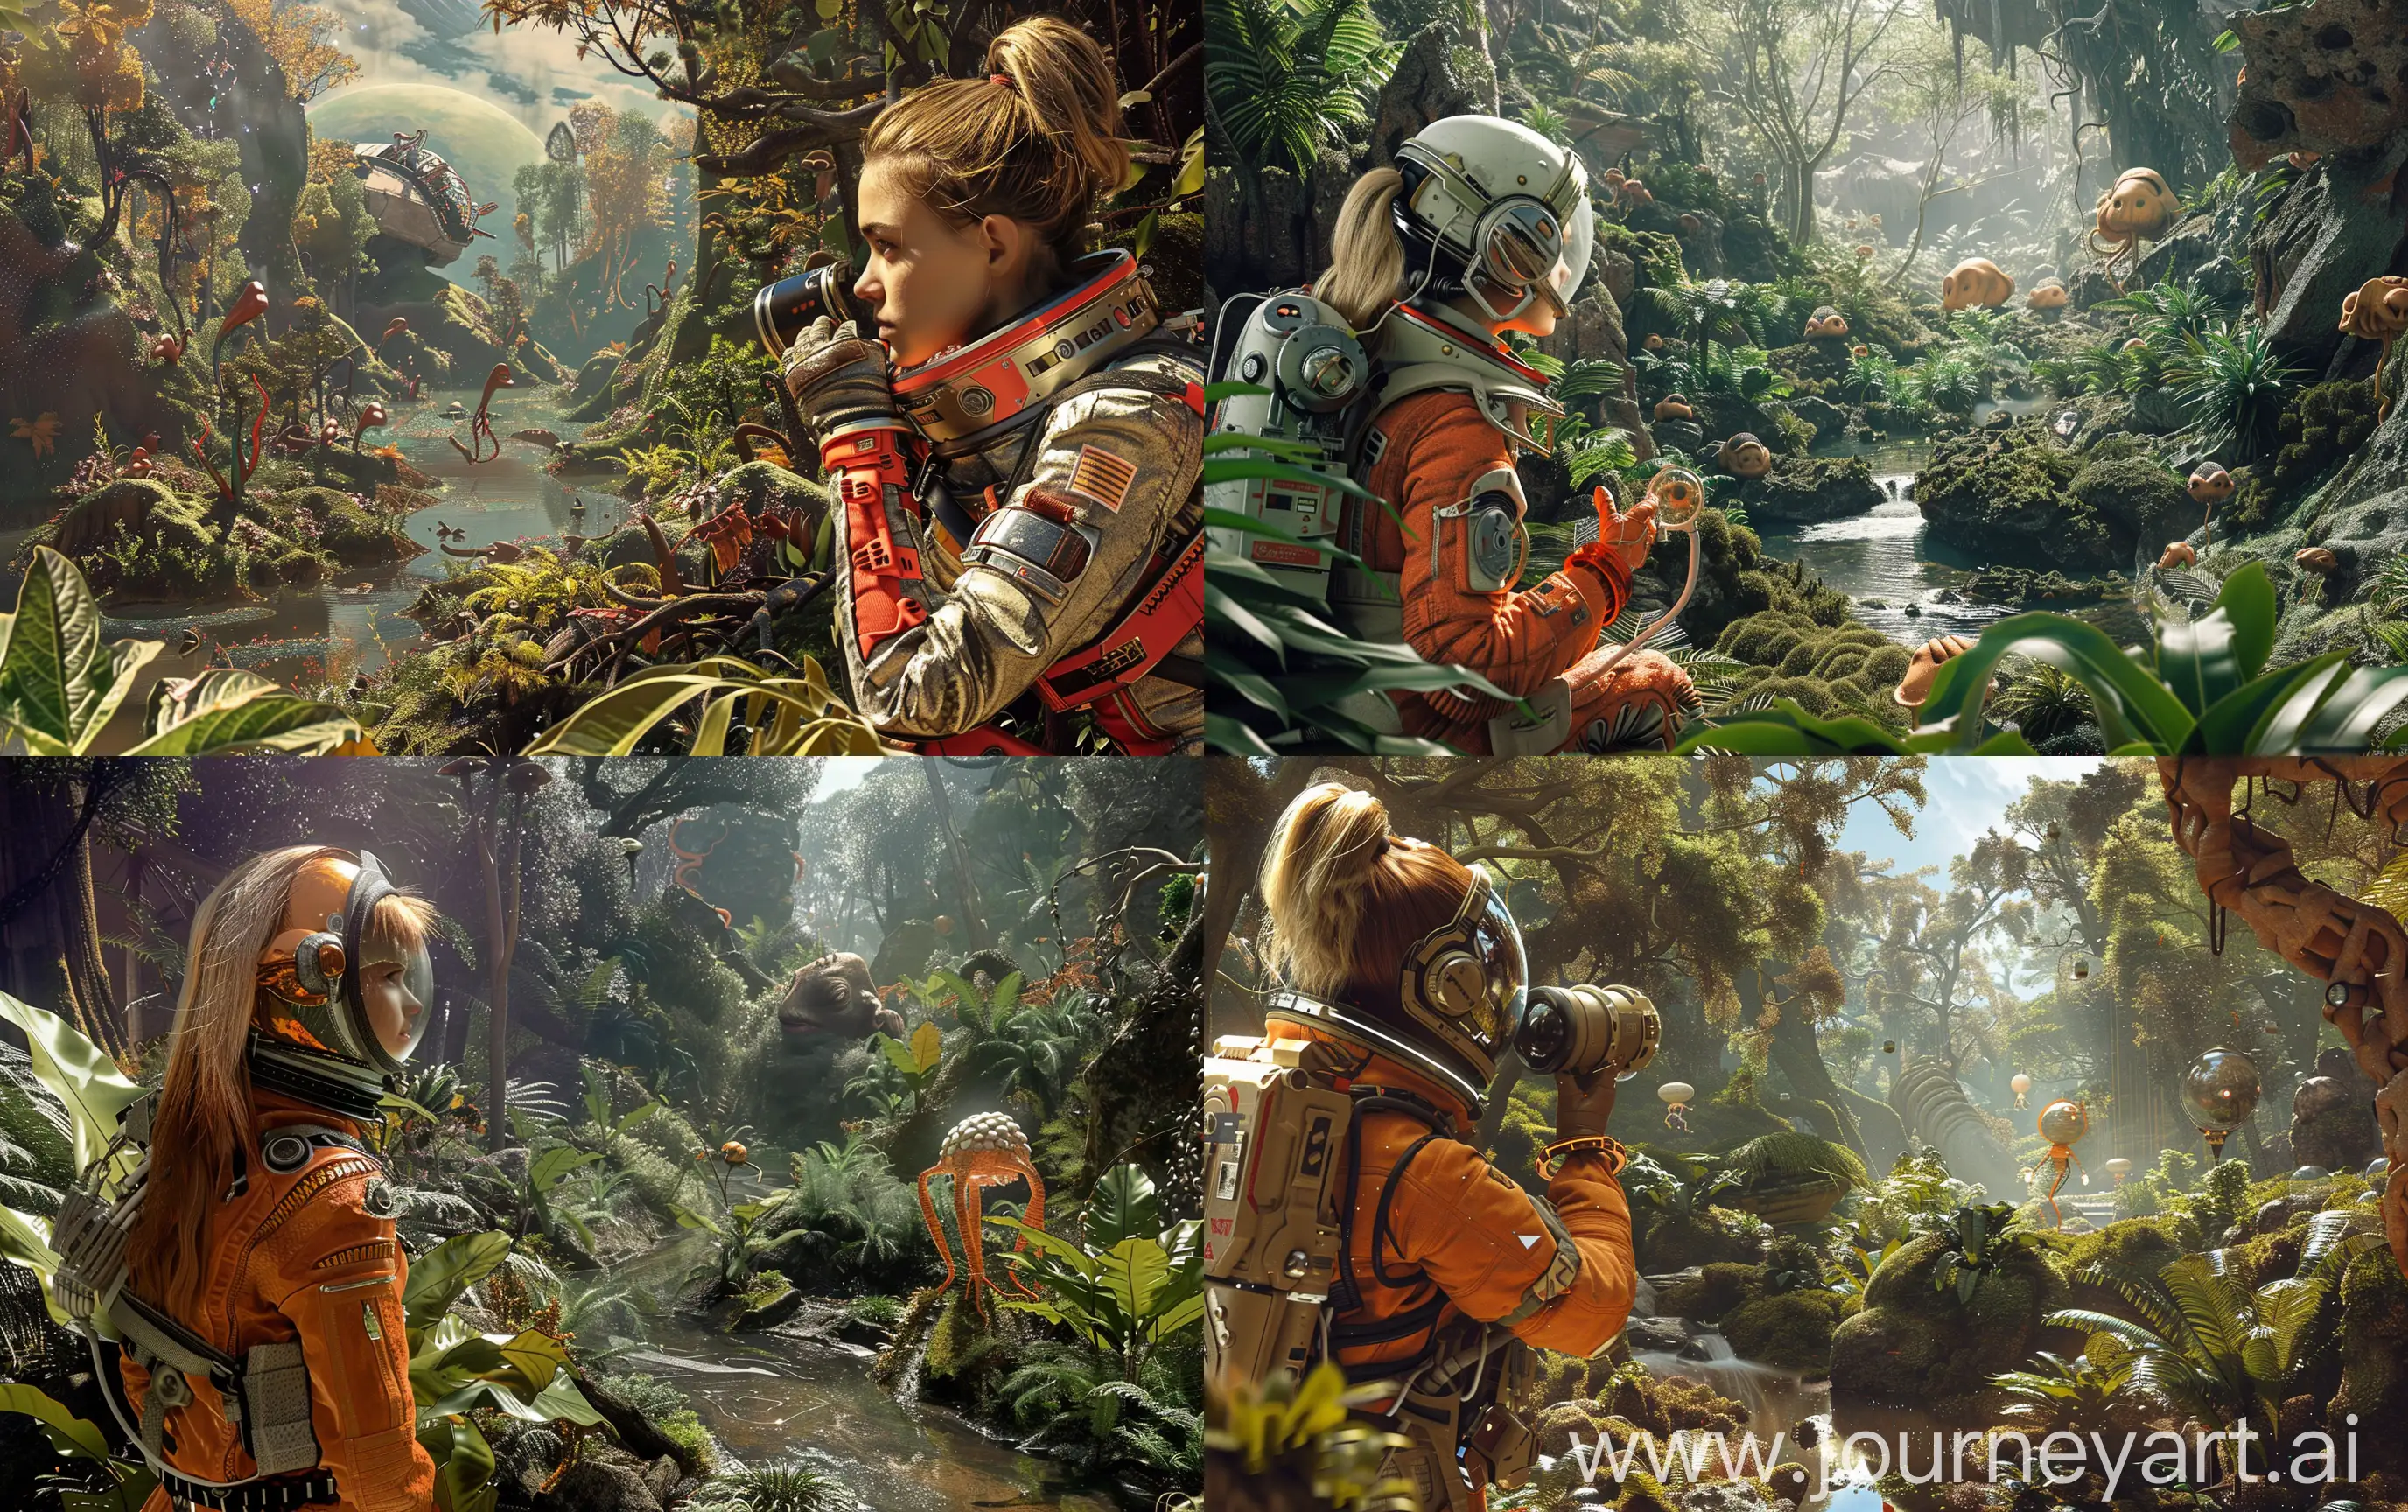 Exploring-Future-Worlds-FairHaired-Female-in-Russian-Spacesuit-Observing-Mysterious-Planet-in-Fantastic-Forest